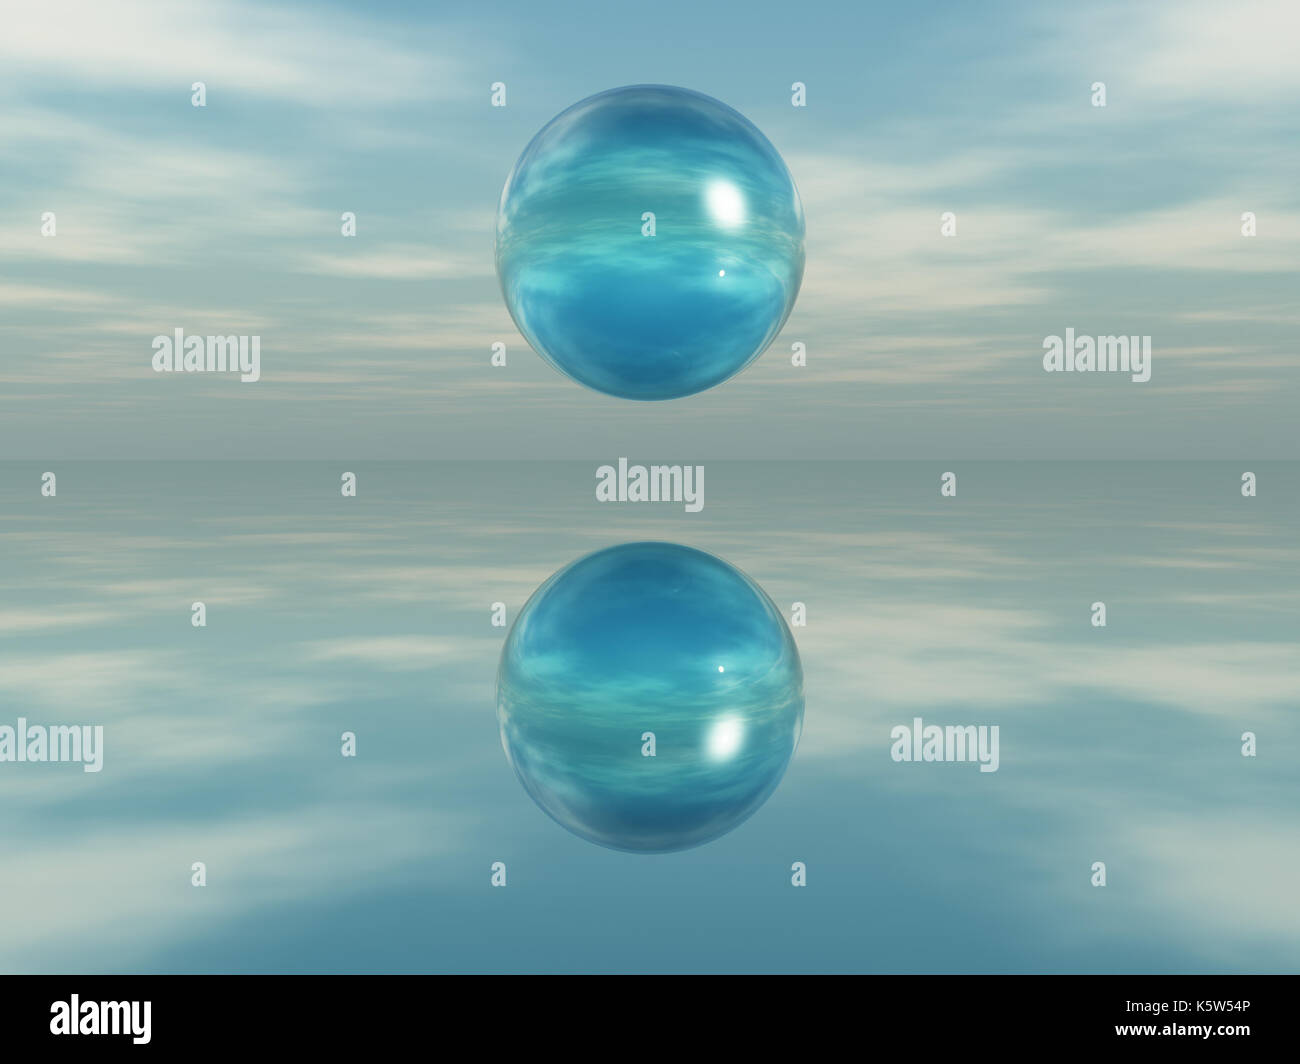 Sphere reflected on a mirrored surface Stock Photo